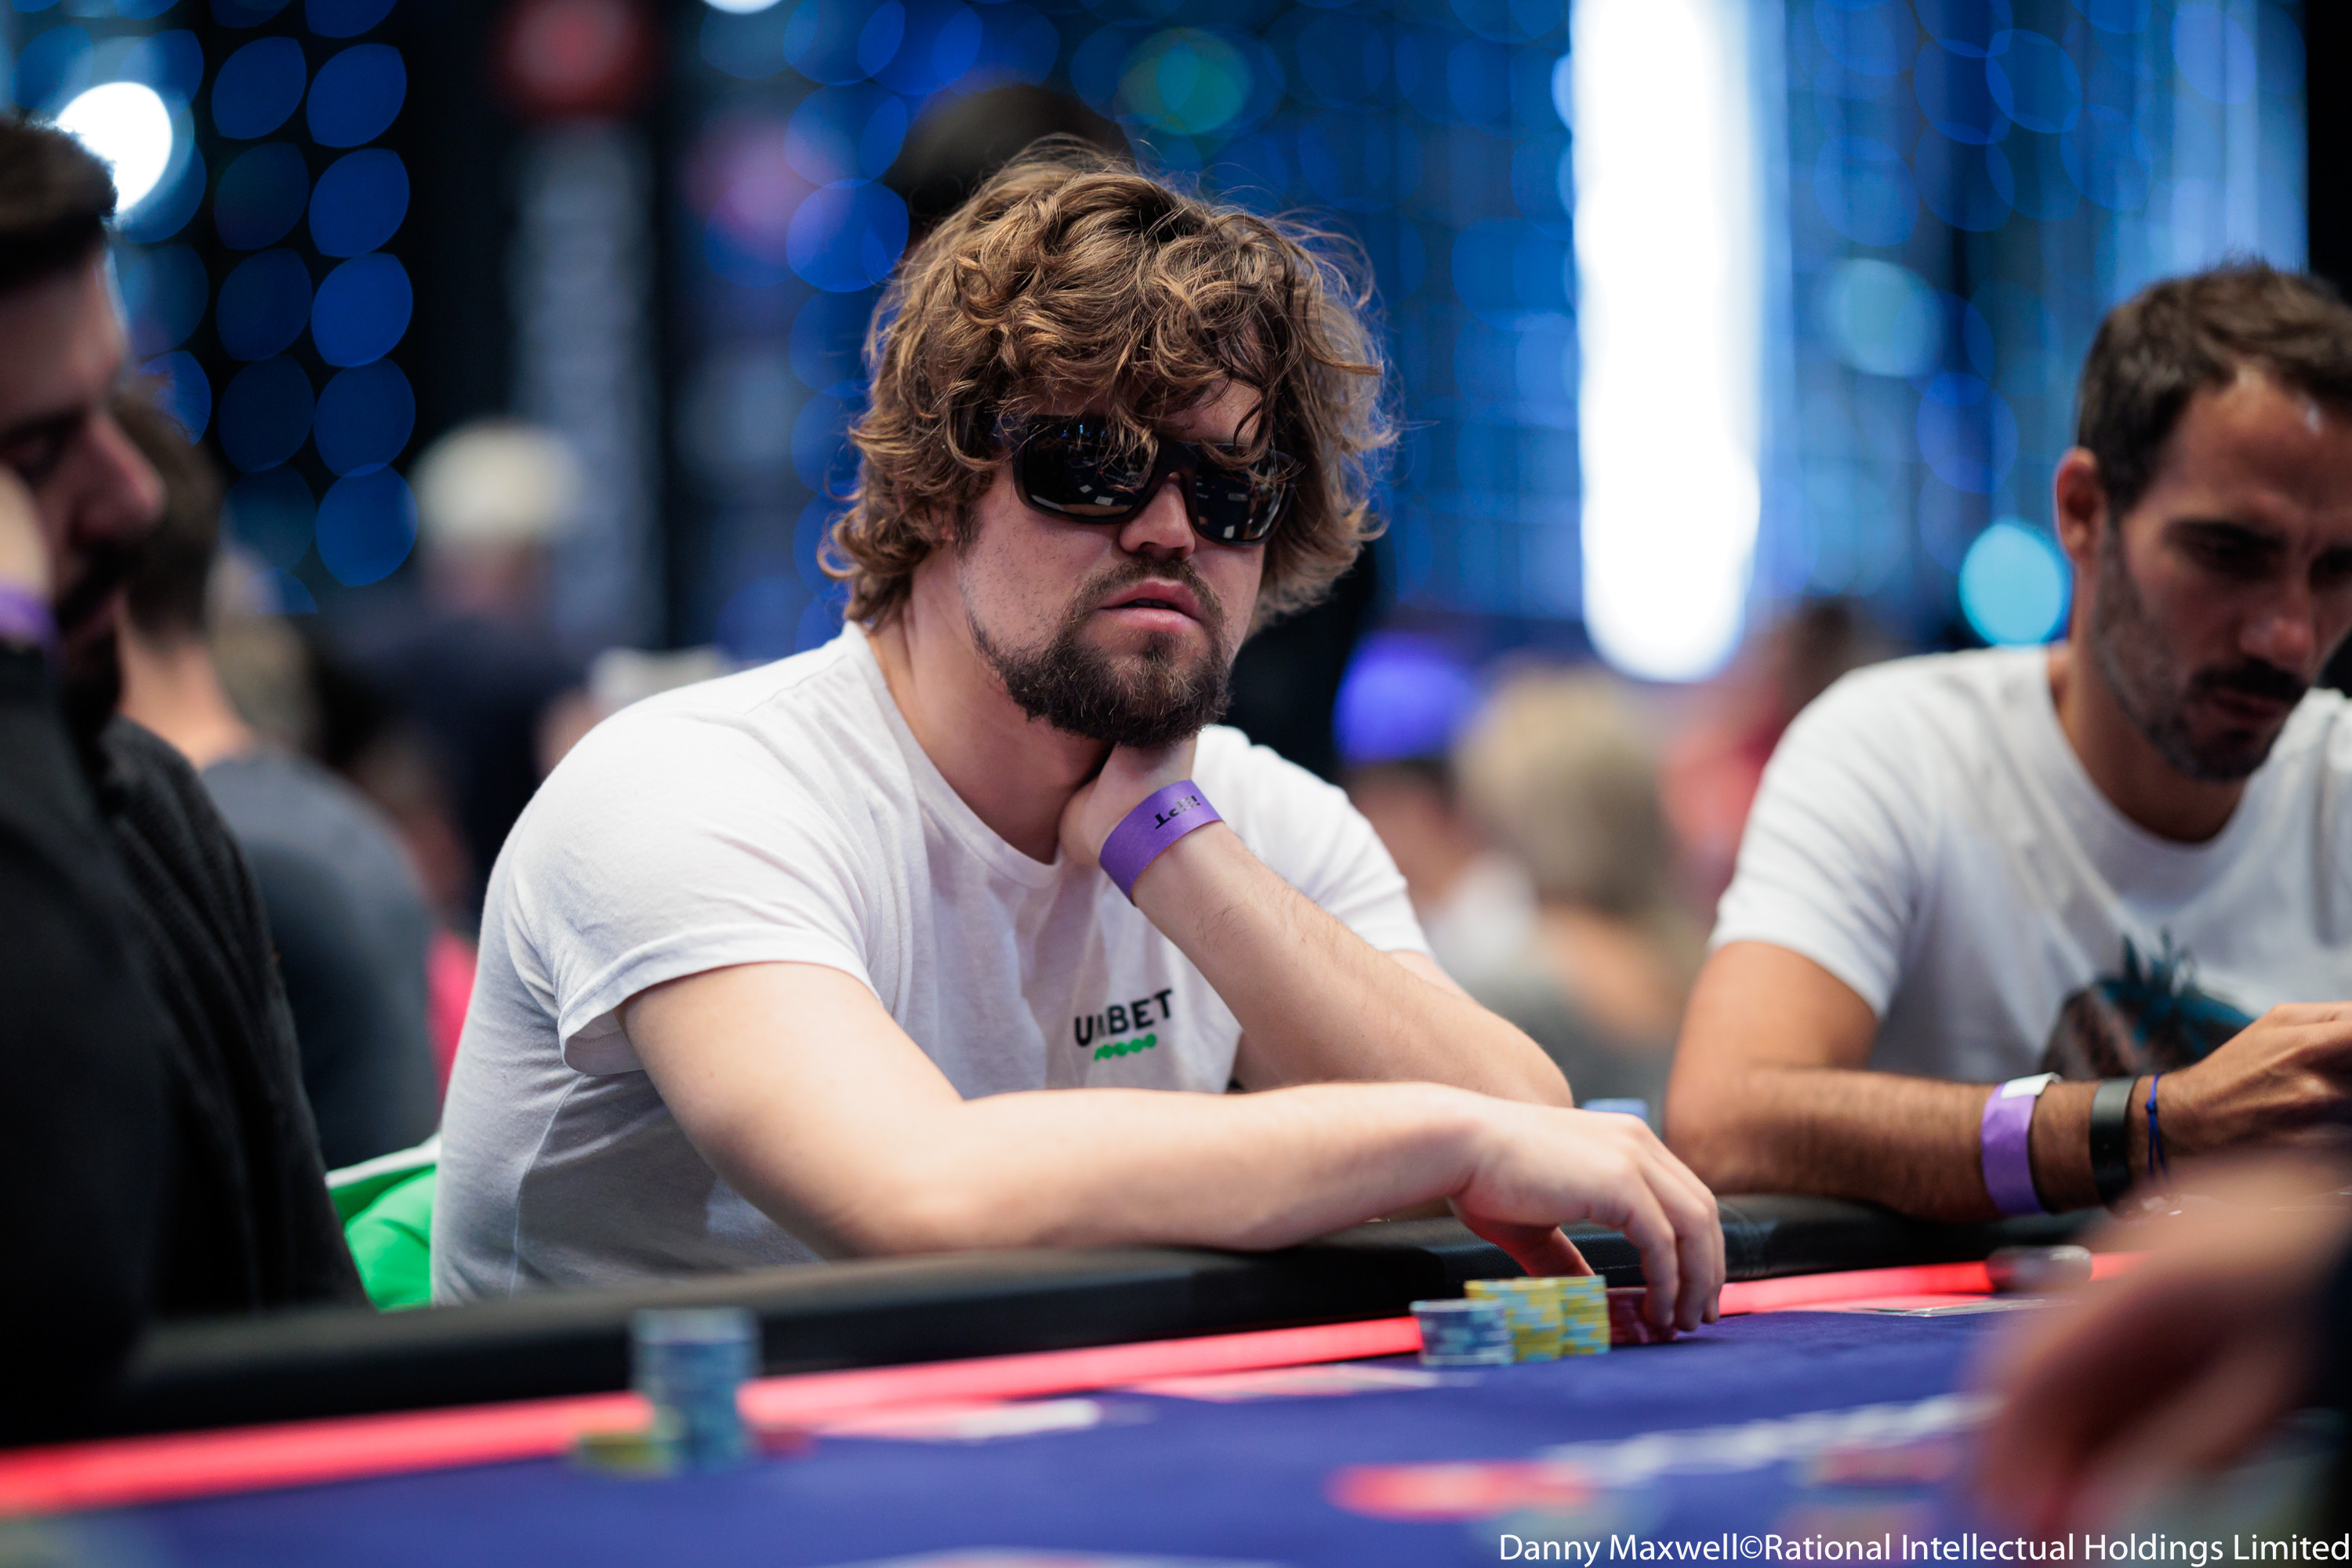 Find Out If Alexandra Botez's $10K River Bluff Worked Against Phil